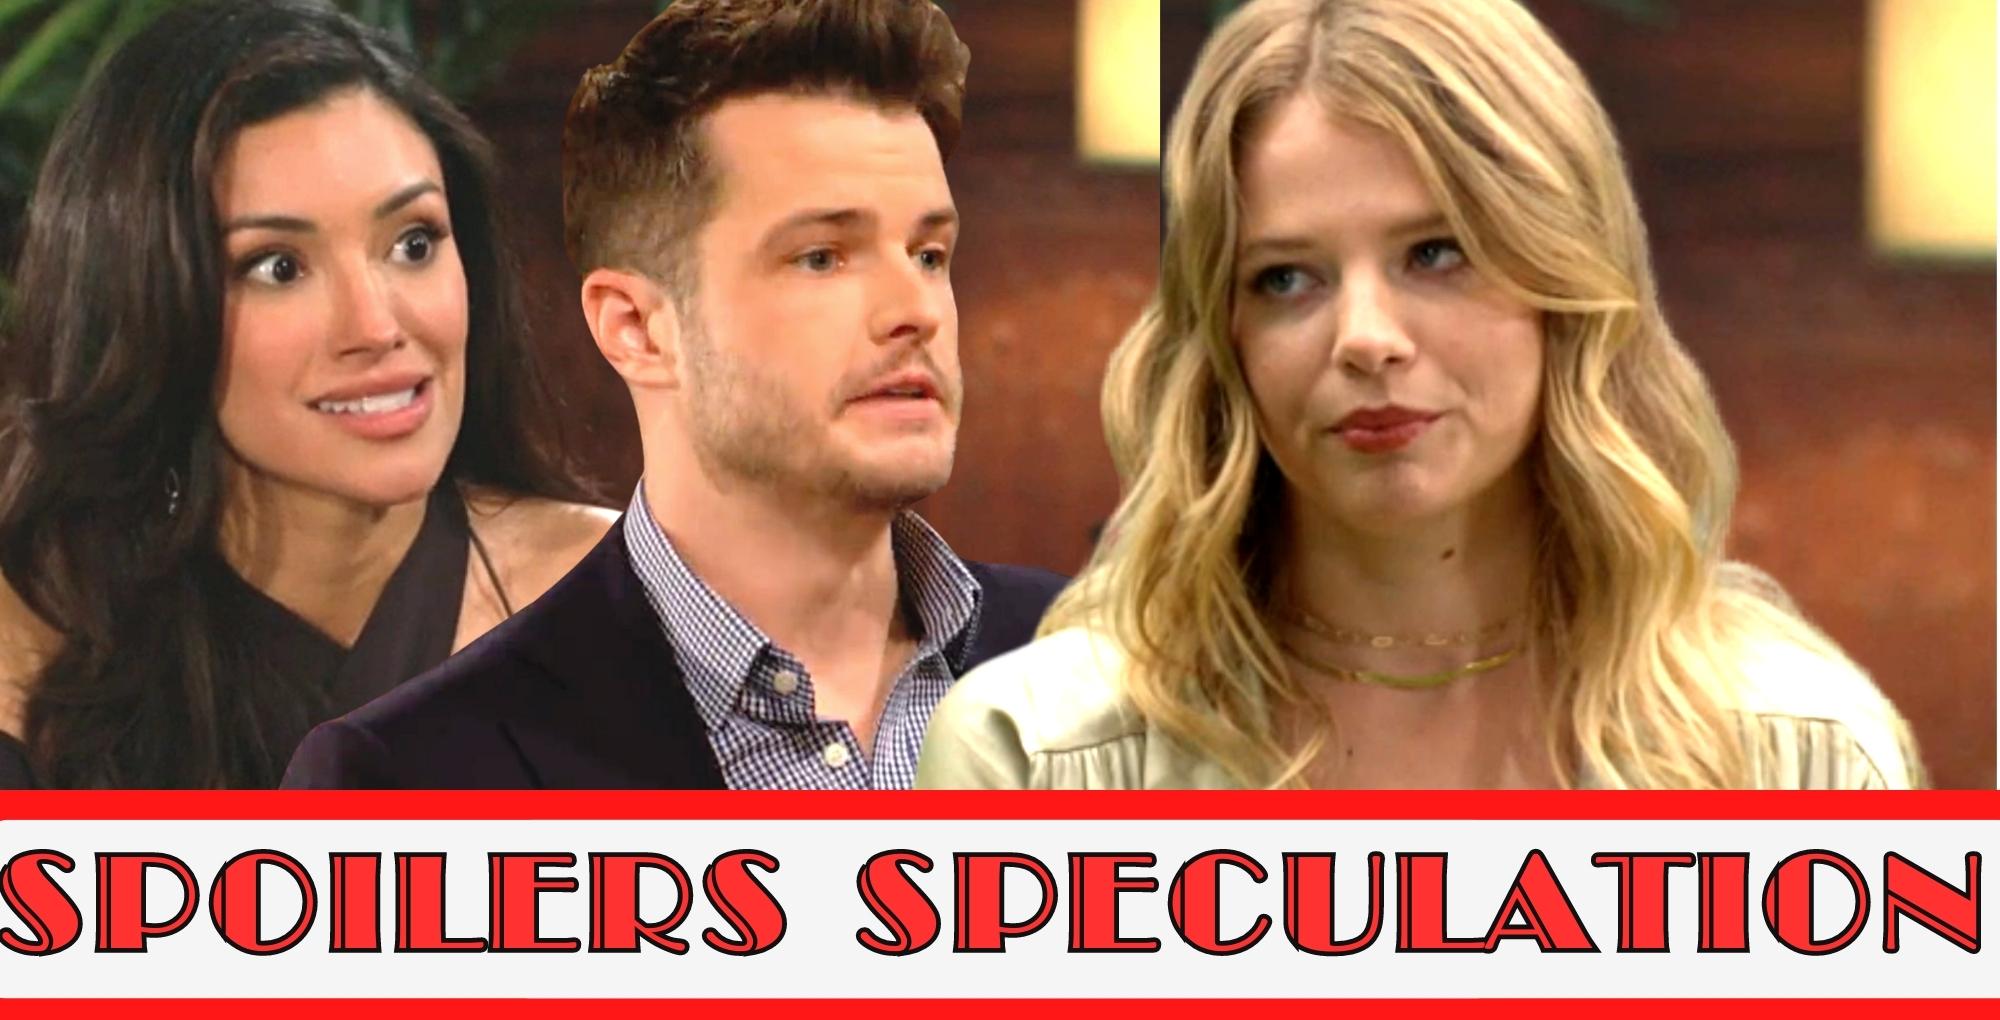 y&r spoilers speculation that summer gets revenge on kyle and audra.